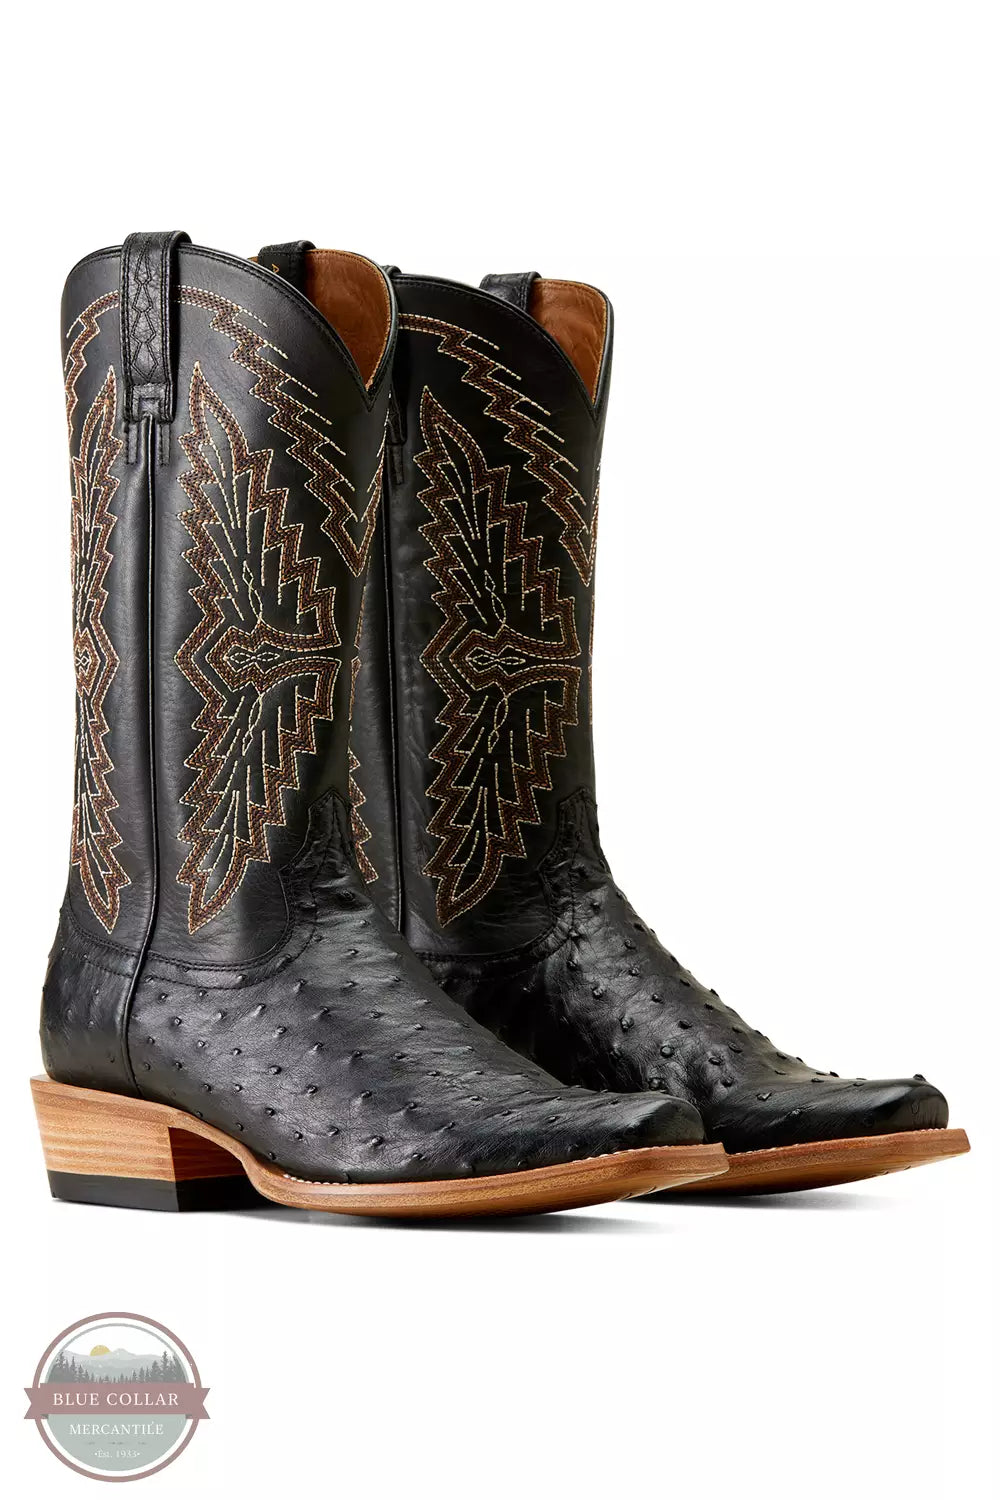 Ariat 10047083 Futurity Done Right Western Boot in Black Full Quill Ostrich Pair Profile View